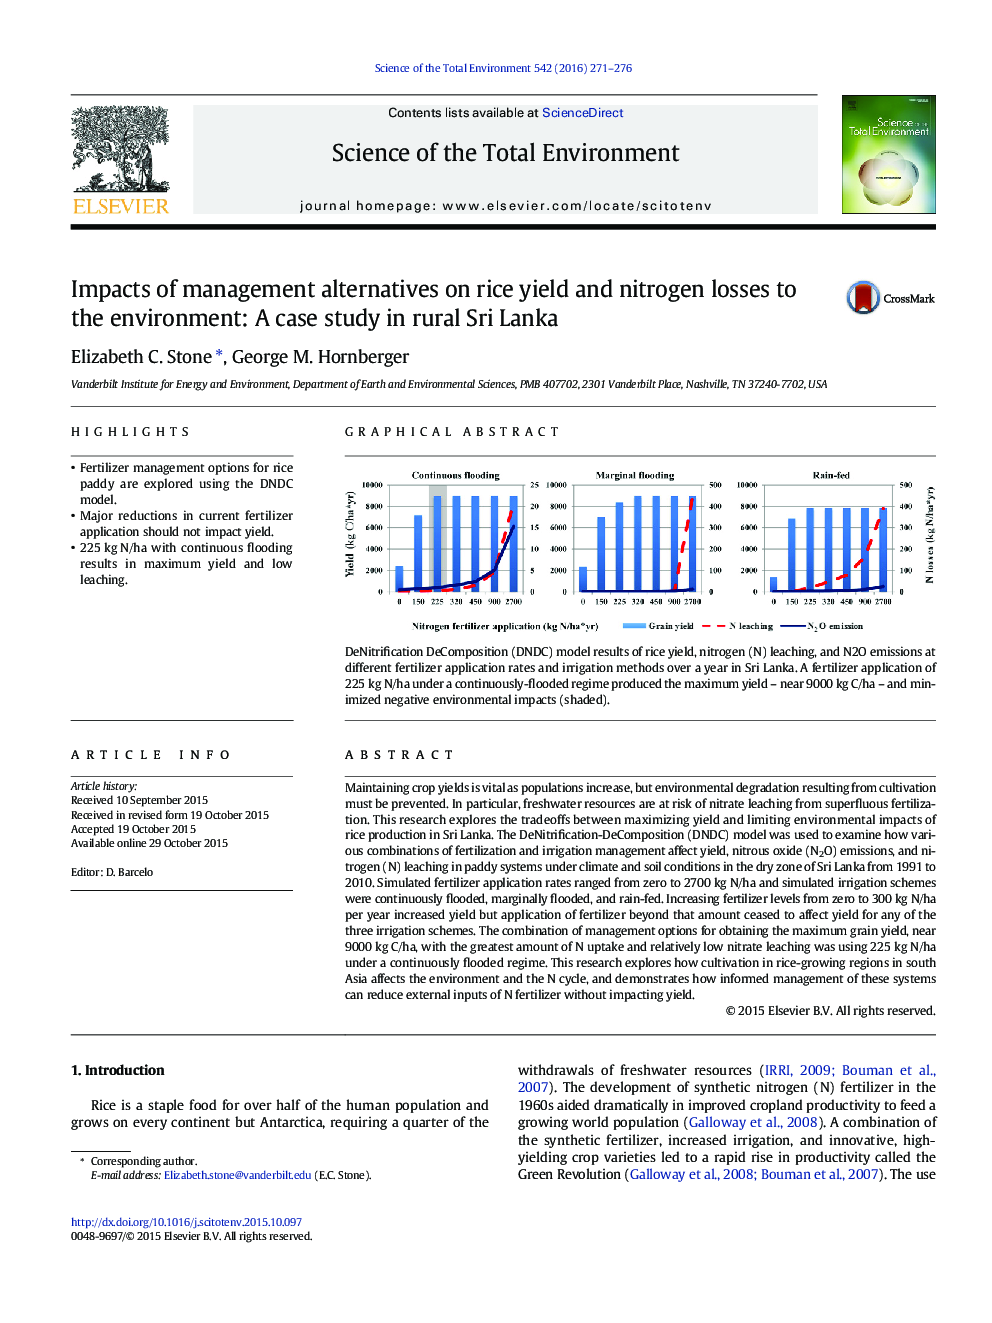 Impacts of management alternatives on rice yield and nitrogen losses to the environment: A case study in rural Sri Lanka